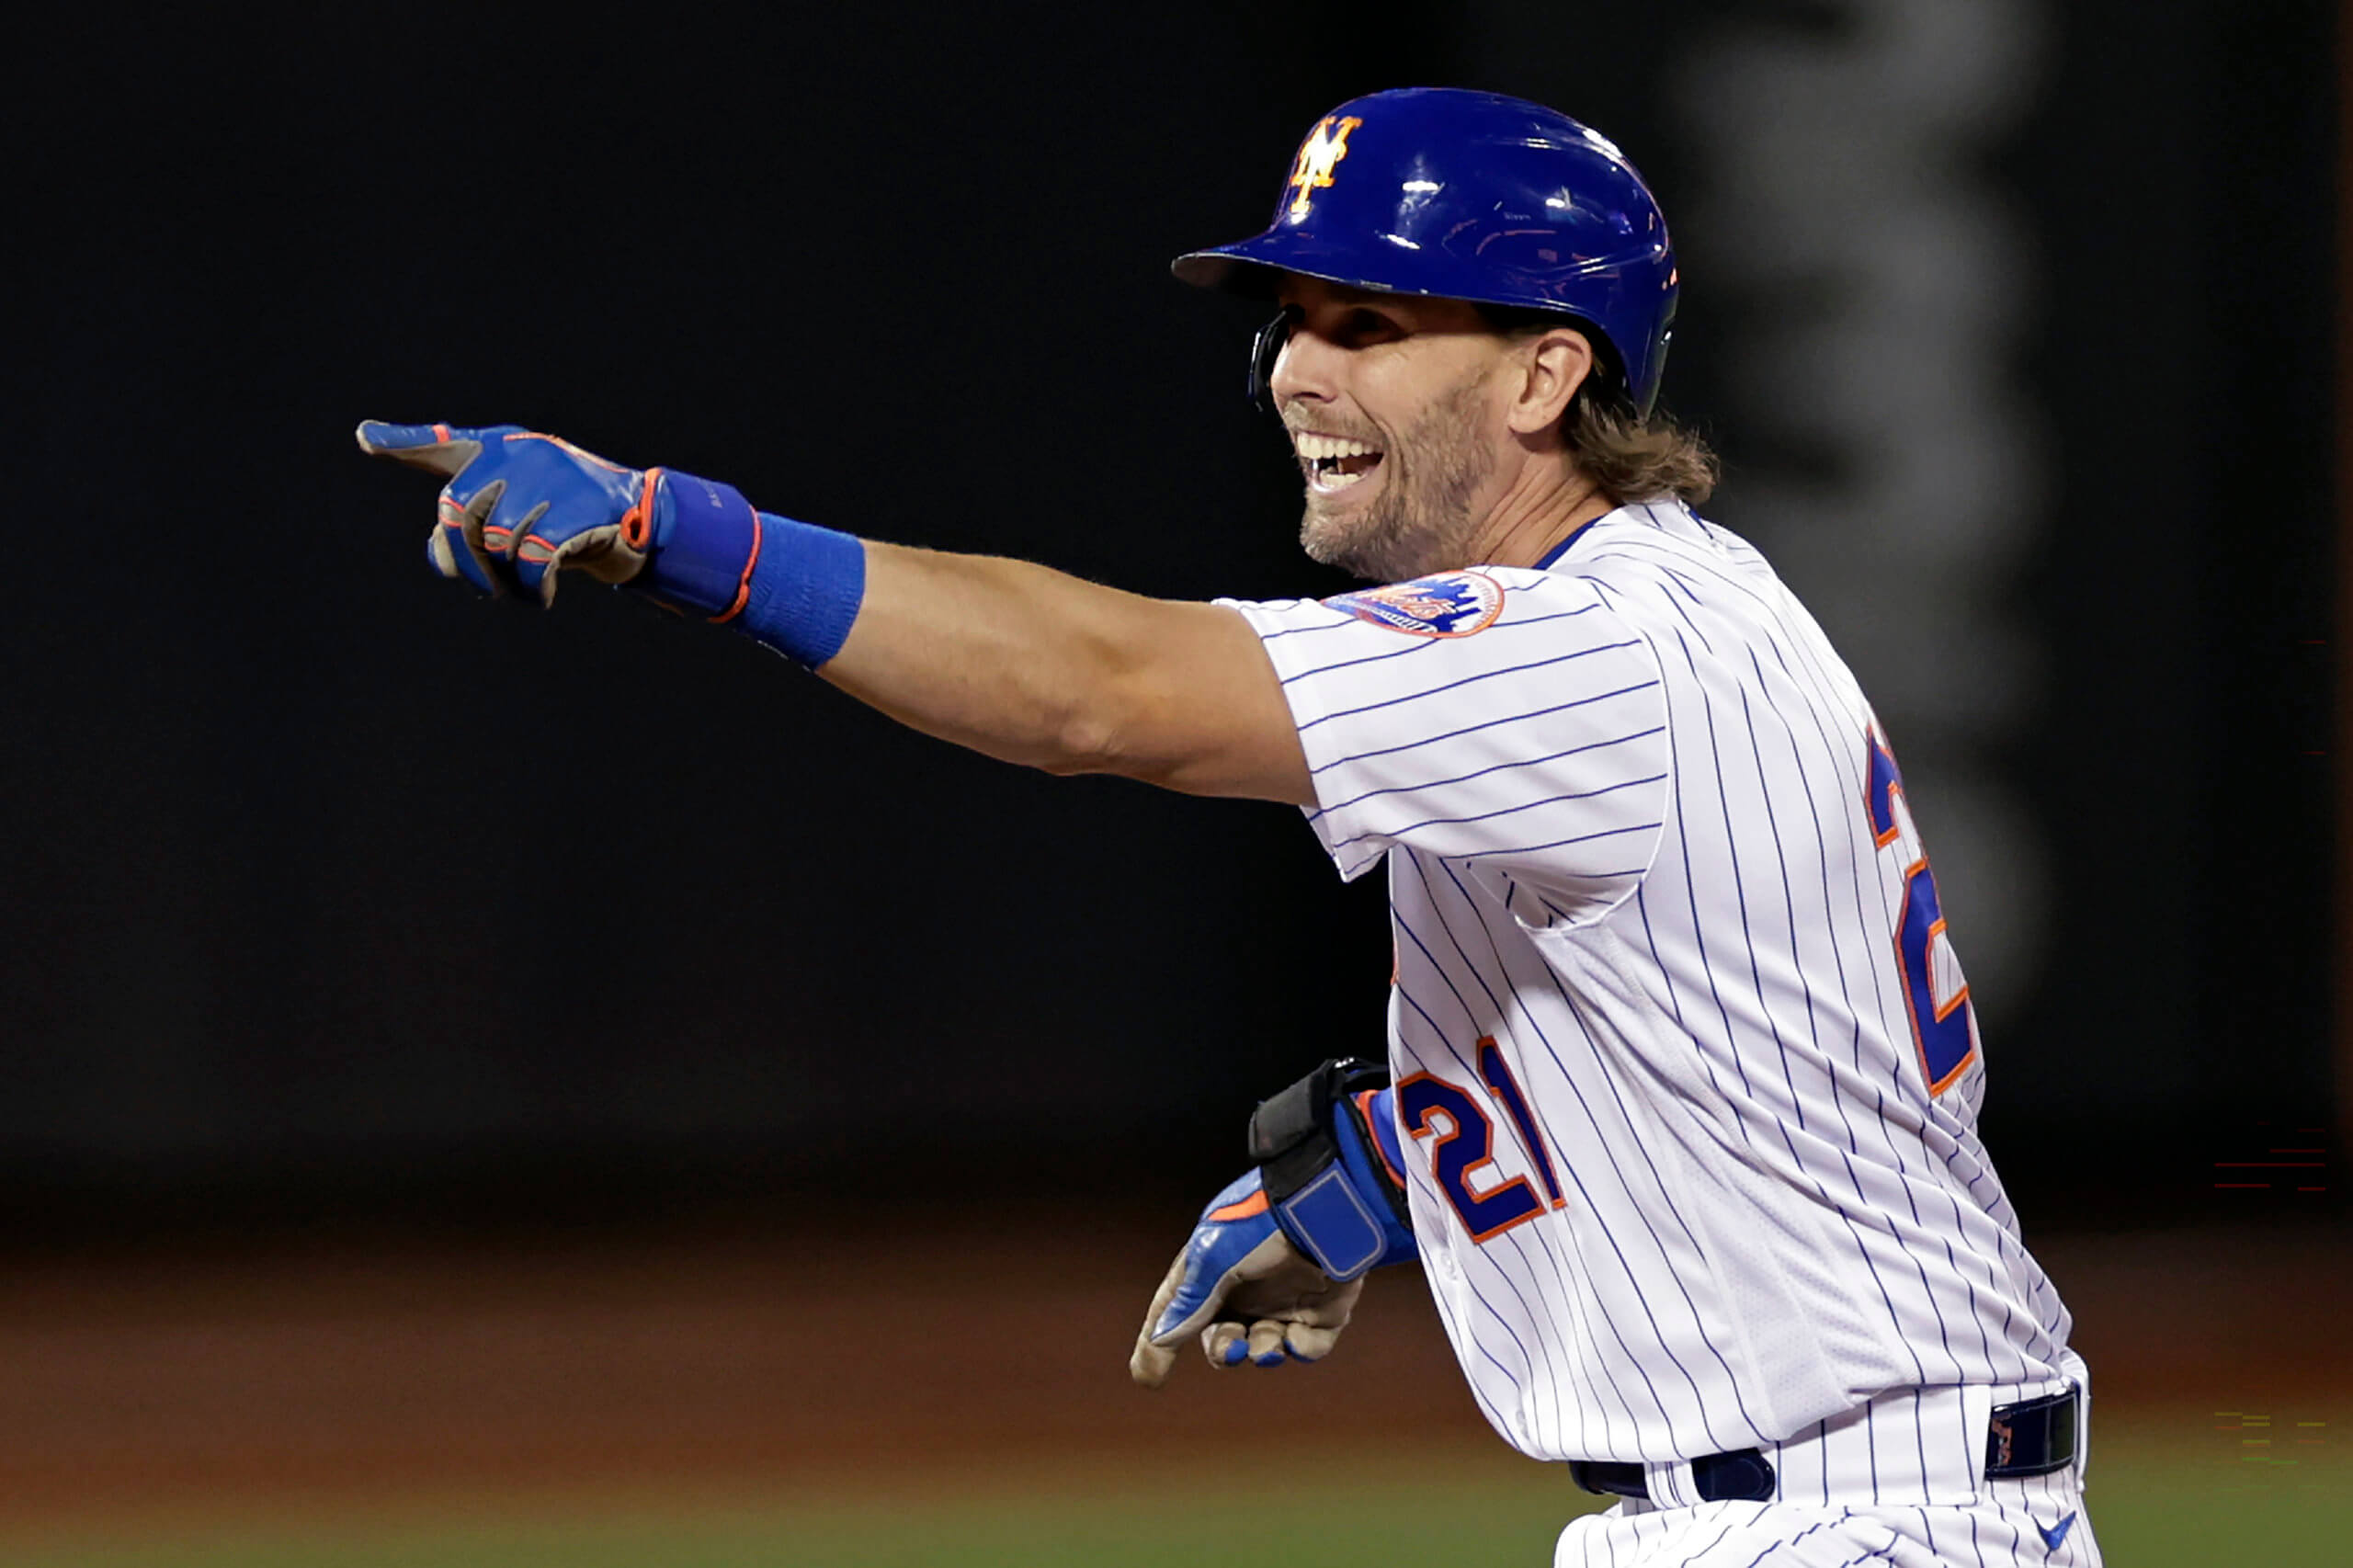 Mets contract extension 'a huge relief' for 'uptight' Jeff McNeil